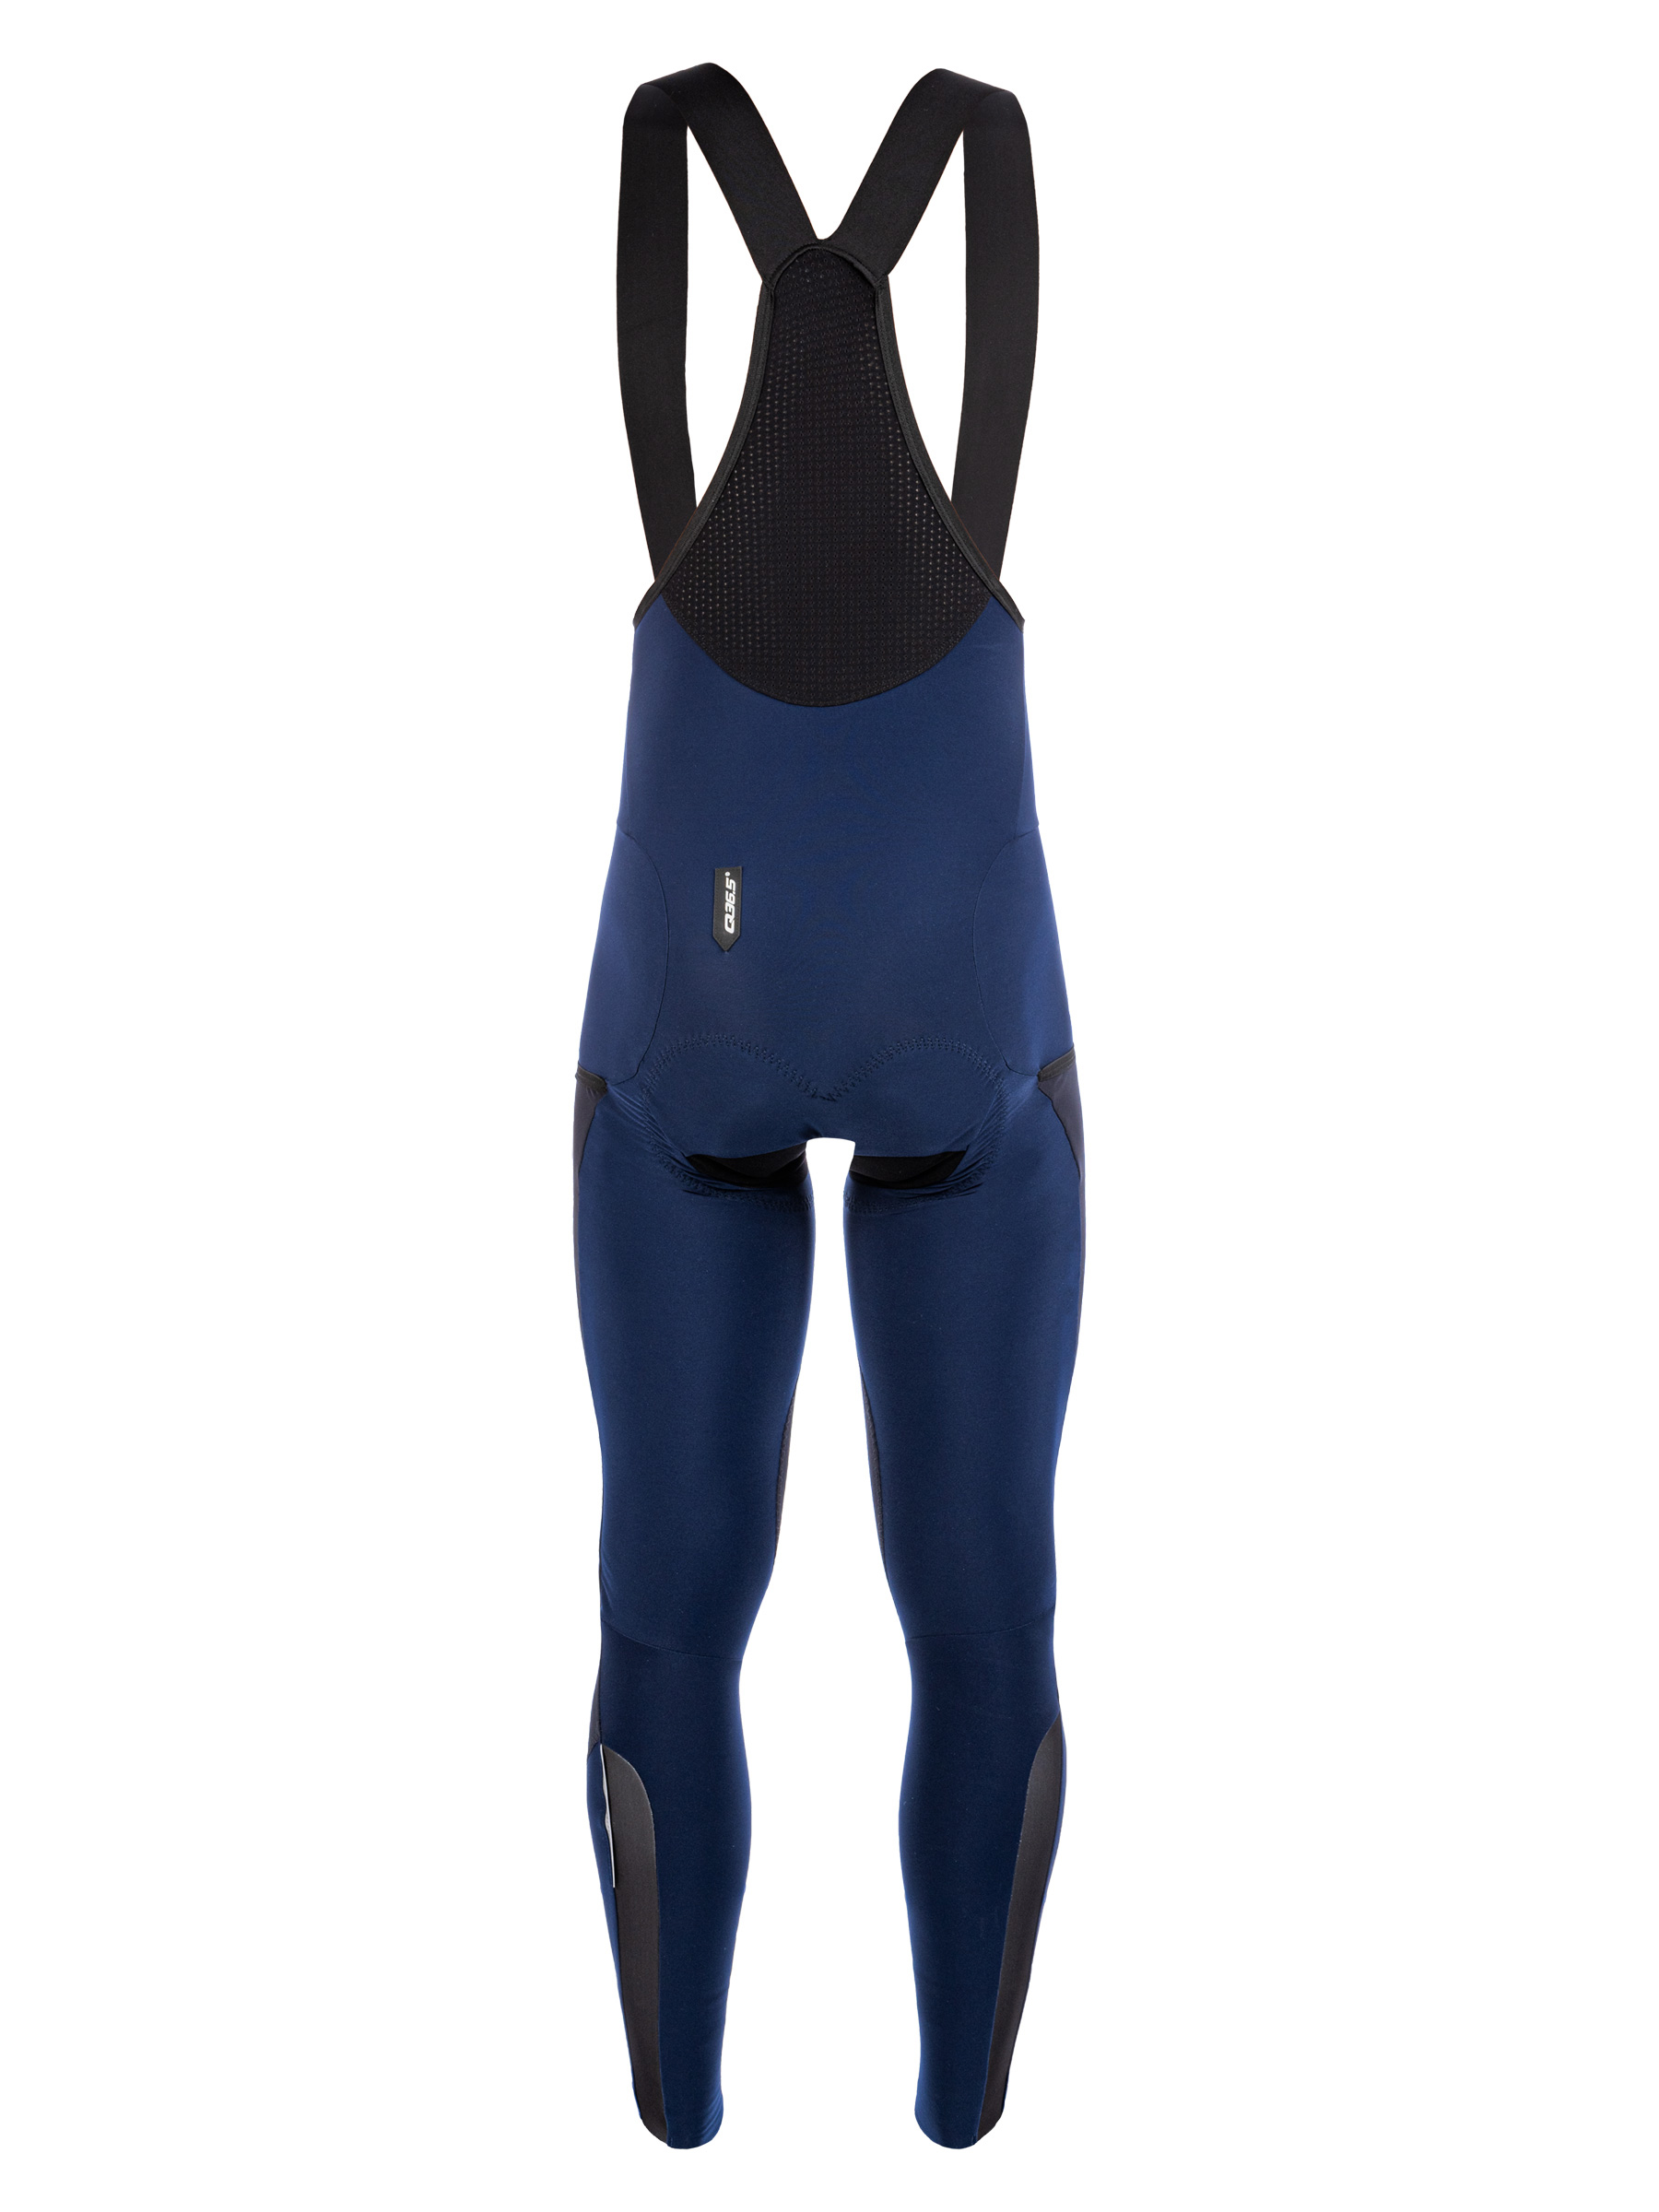 Bike Tights (with Bike Pad) in Blue Lightning on Black Tricot